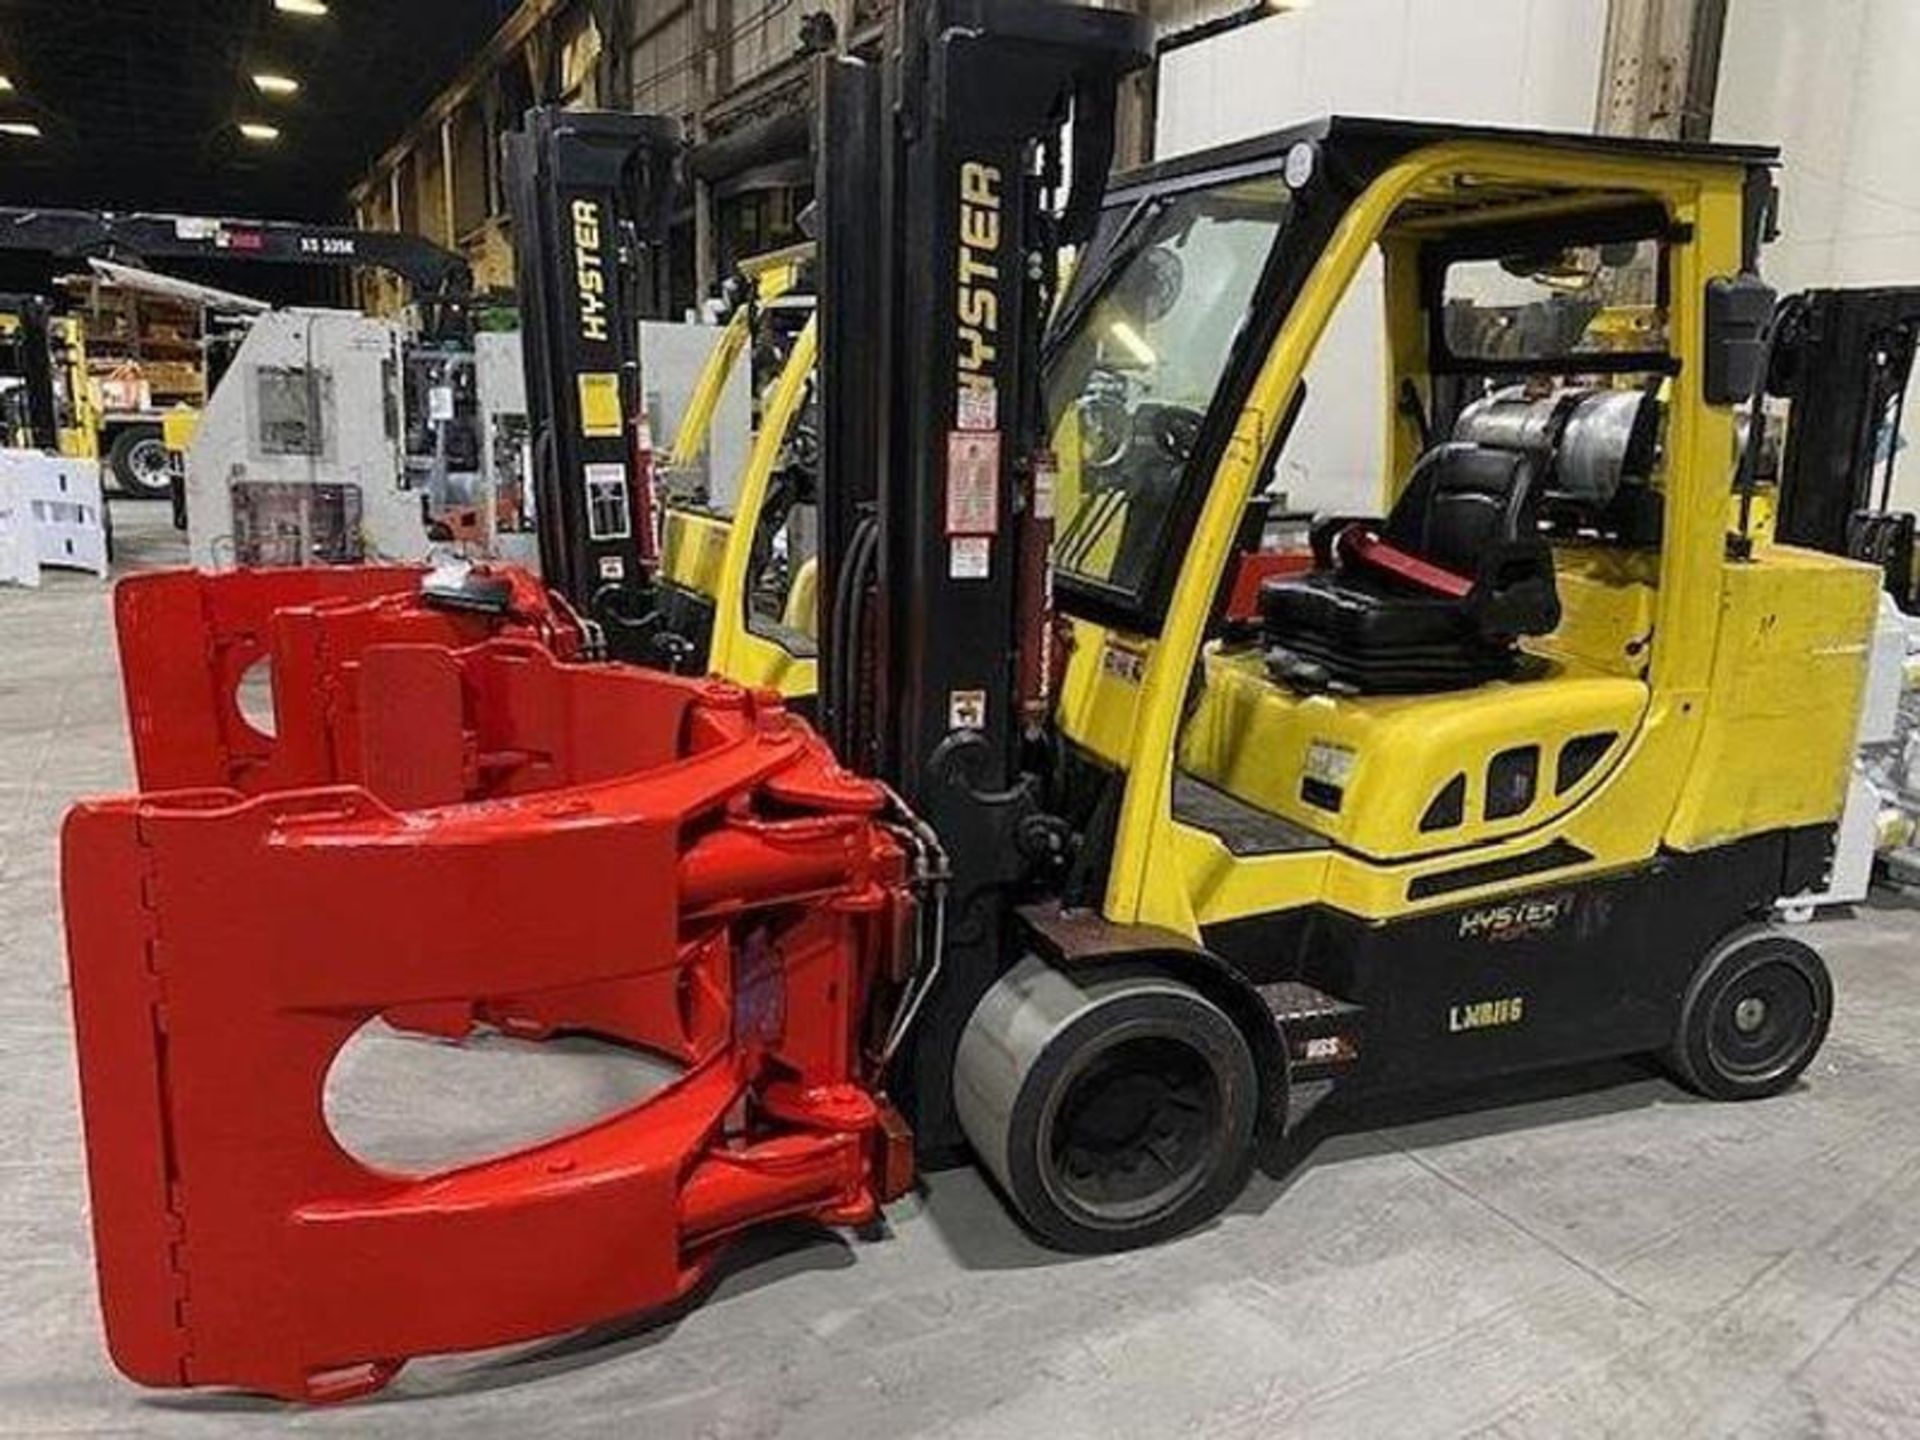 12,000 POUND HYSTER S120FTPRS FORKLIFT WITH BOLZONI PAPER ROLL CLAMP TRIPLE STAGE MAST MFG. 2018 - Image 3 of 12